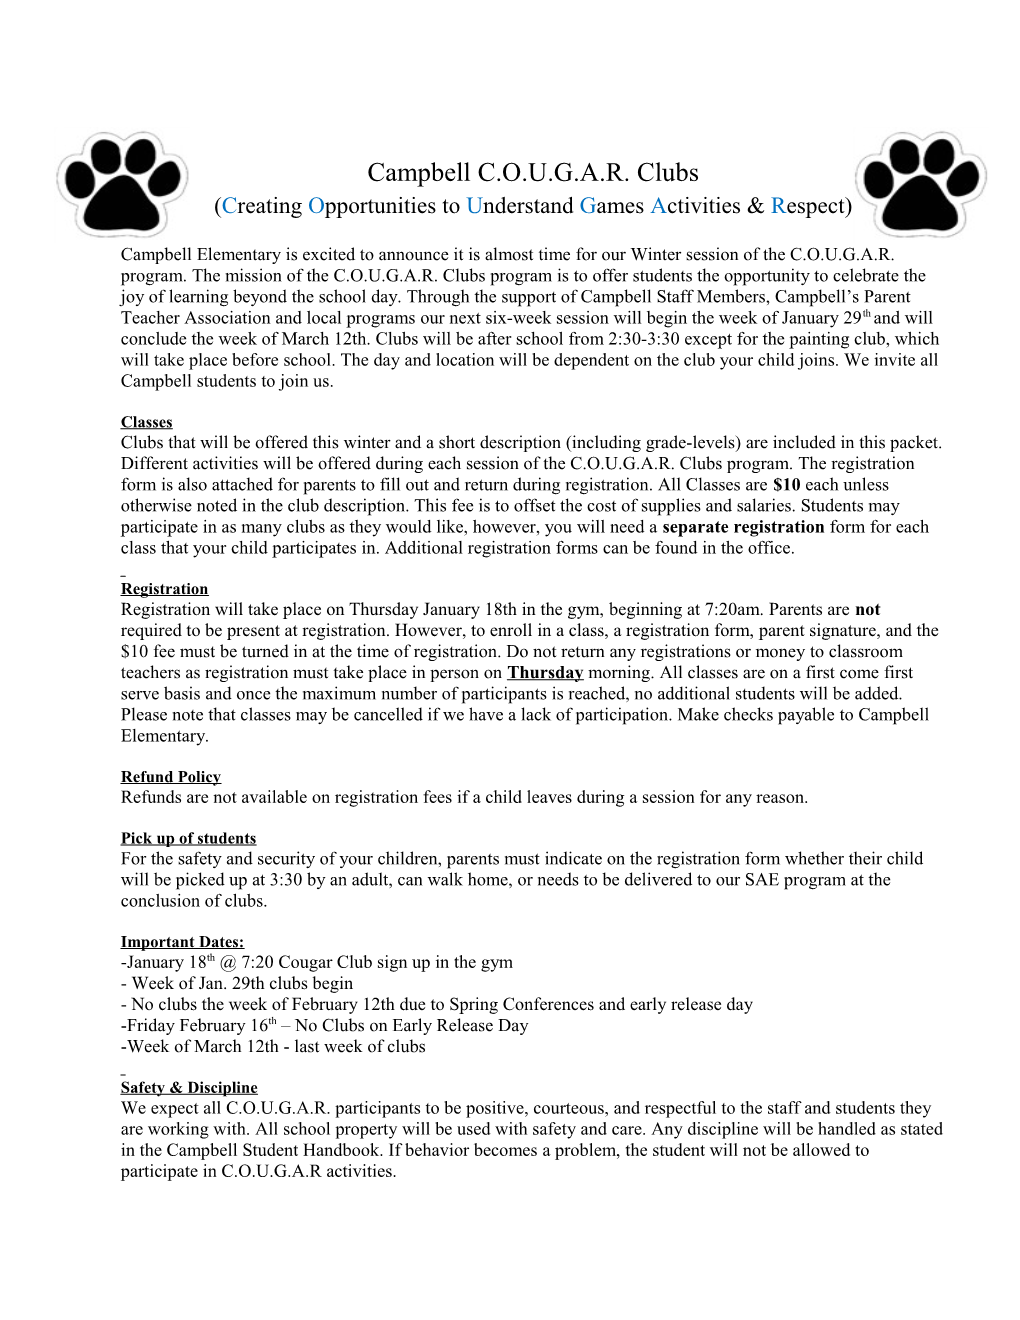 Cougar Clubs Offered This Winter